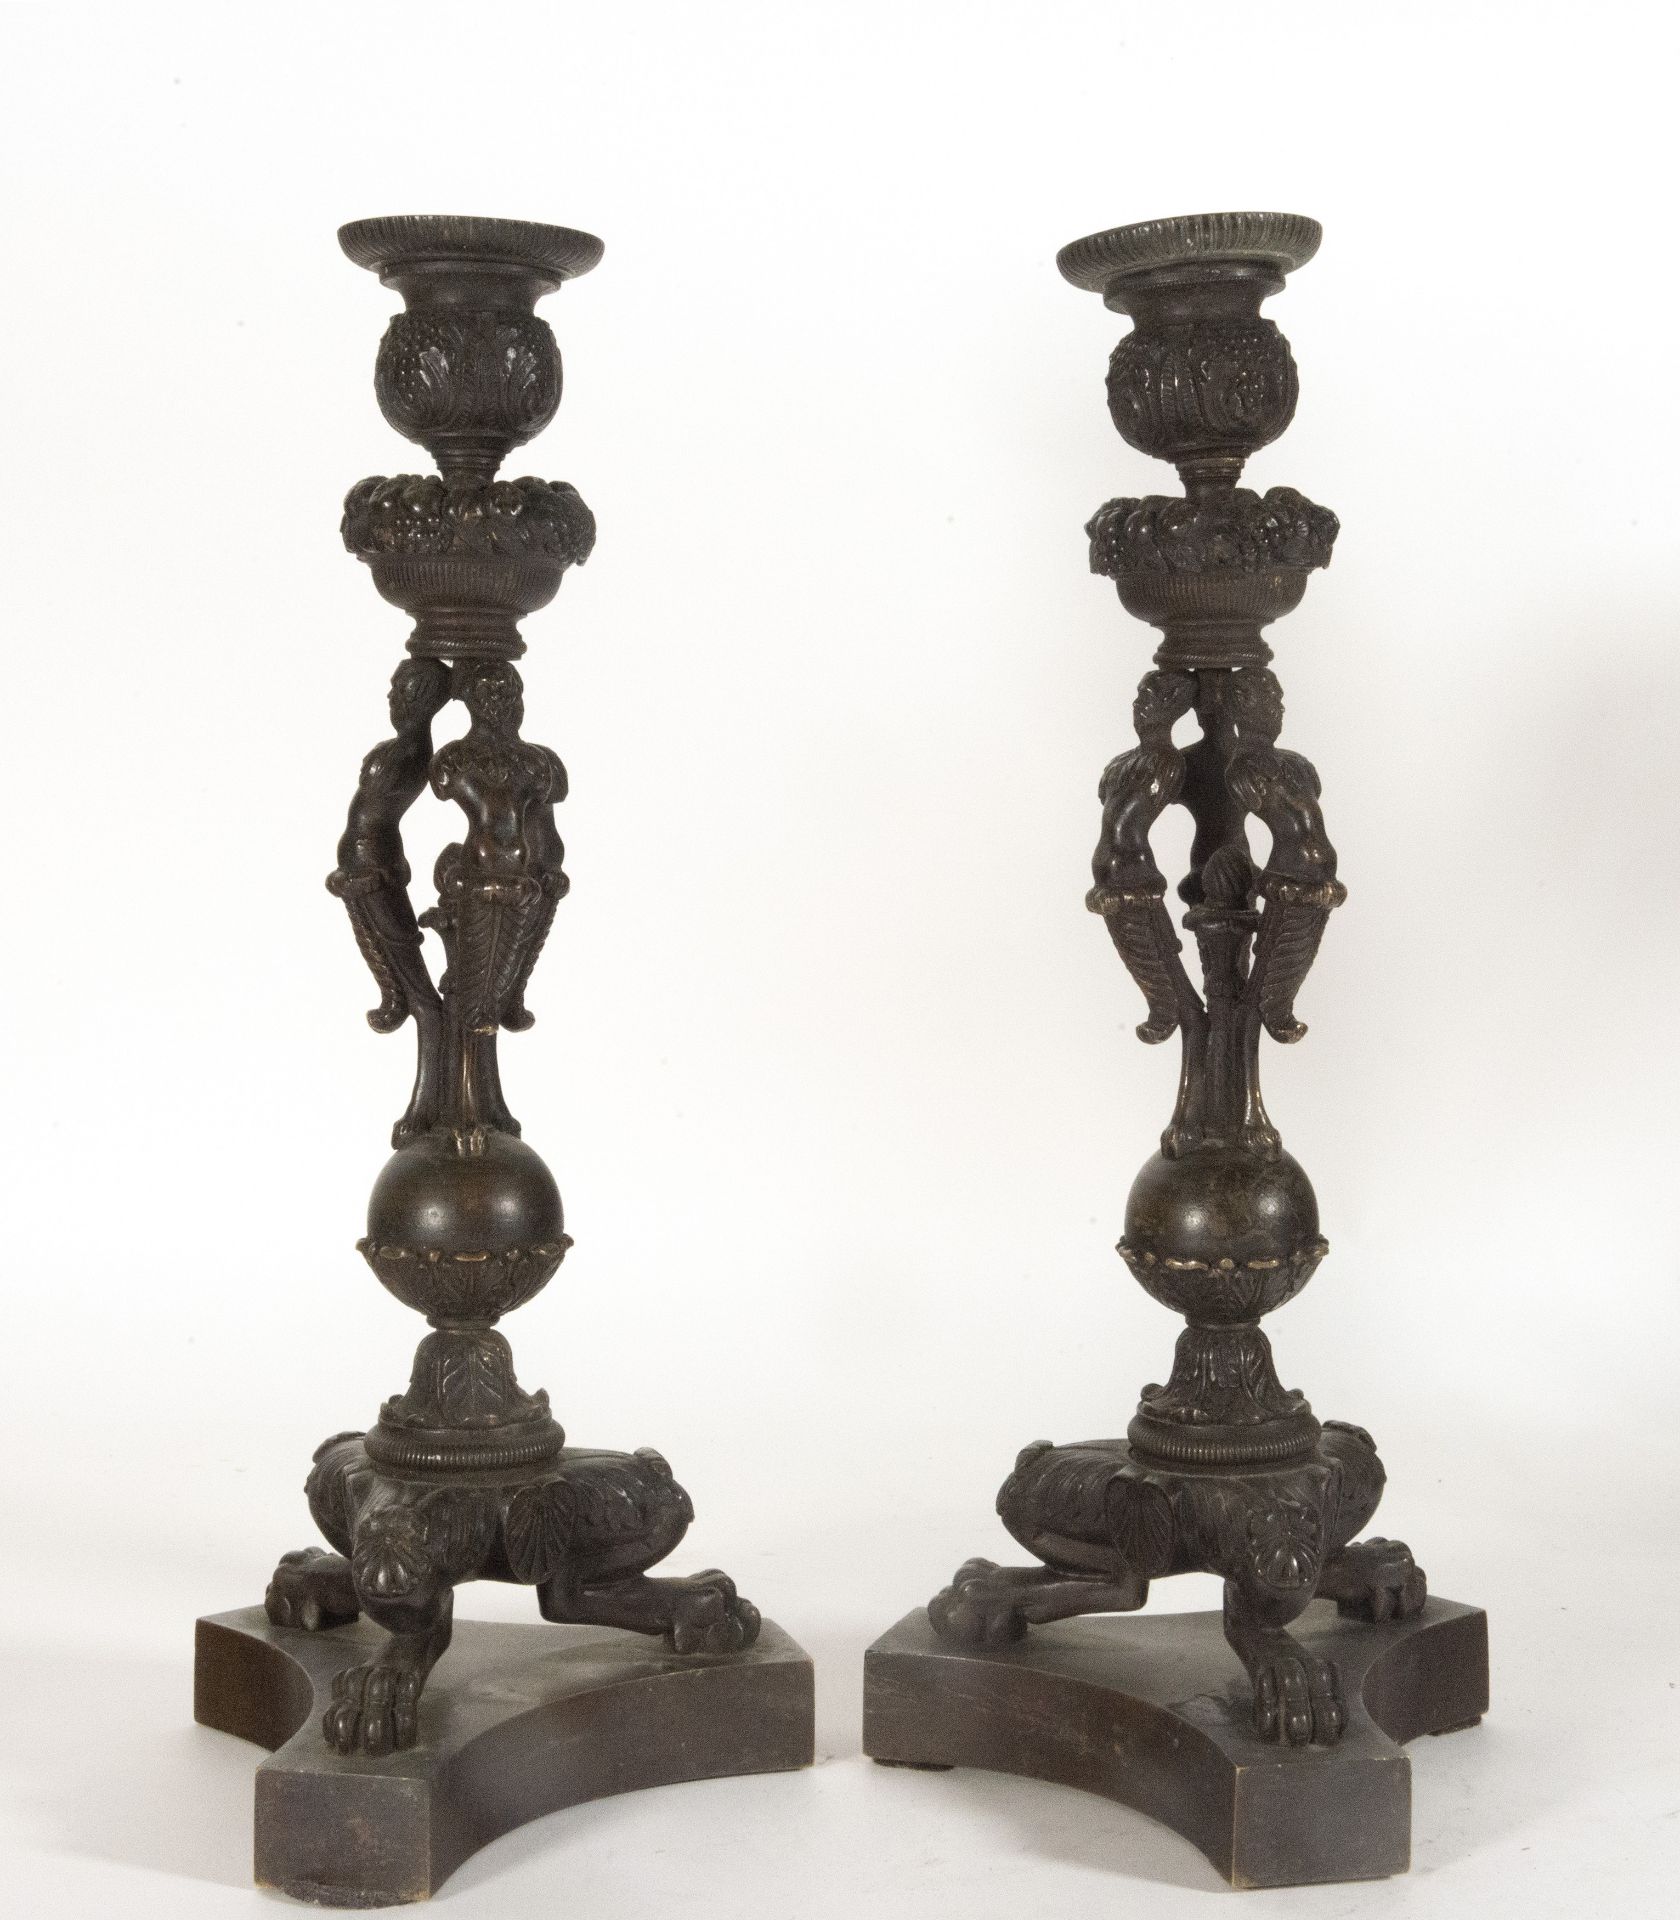 Pair of Renaissance Style Candelabras from Padua in patinated bronze, 19th century